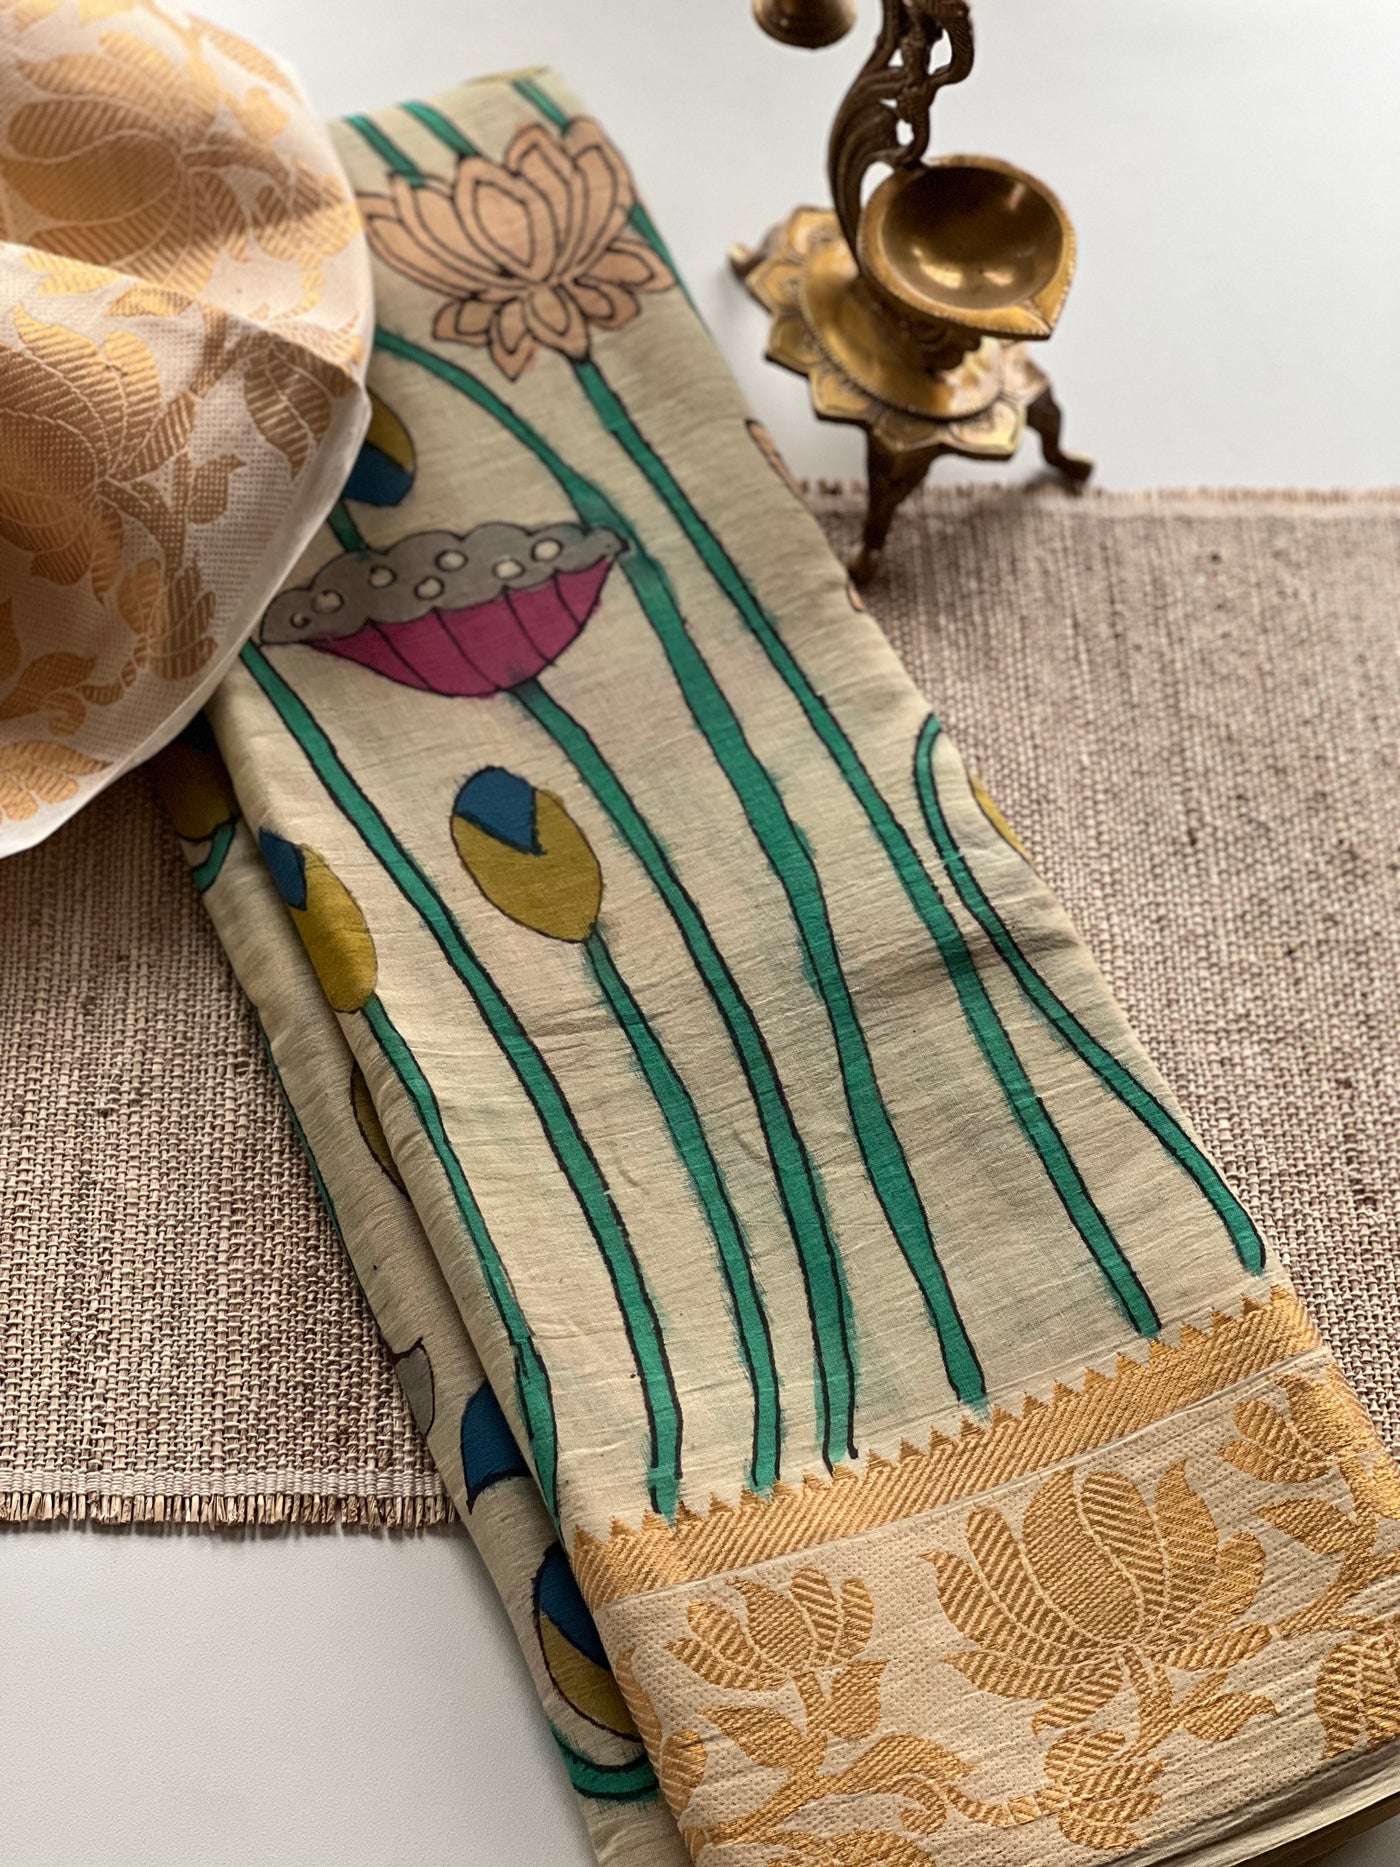 Kalamkari Cotton Sarees by Prashanti | 6 May 22 | Shop the new arrivals  online @ https://www.prashantisarees.com/collections/kalamkari-cotton-sarees  We, at Prashanti, have a wonderful collection of... | By Prashanti | Hello  all, welcome